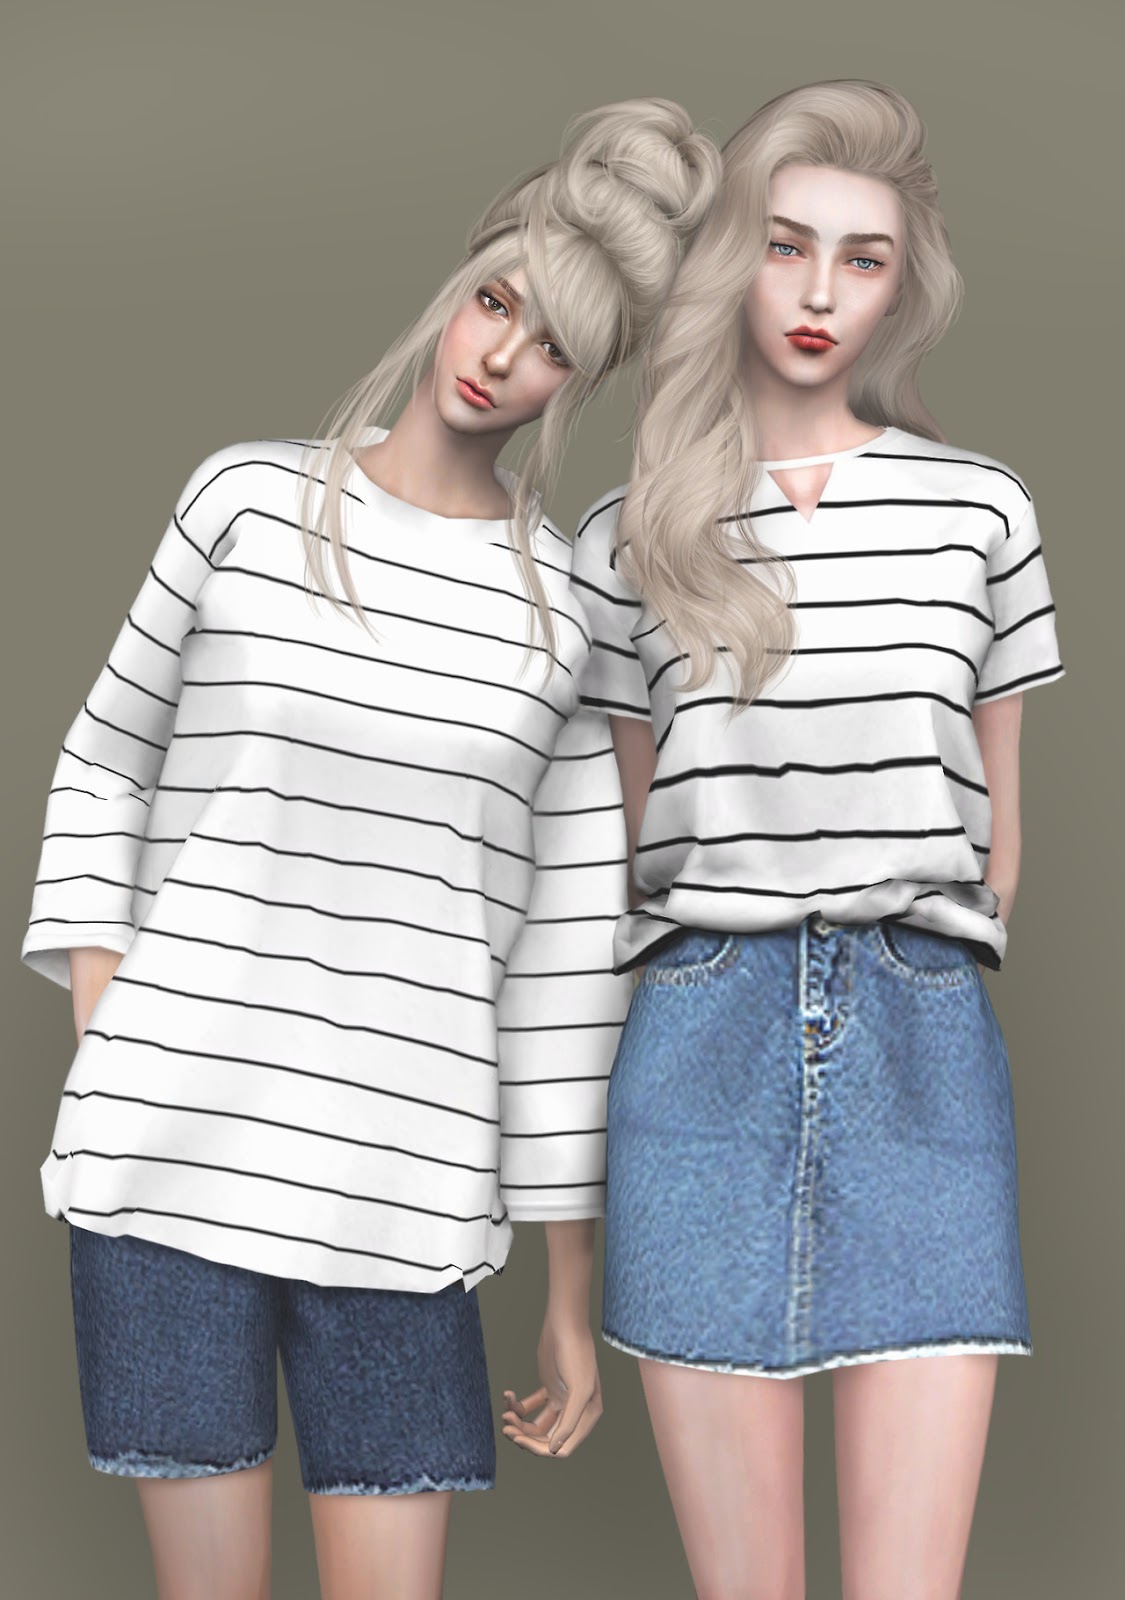 Sims 4 CC's The Best Clothing by spectacledchicsims4